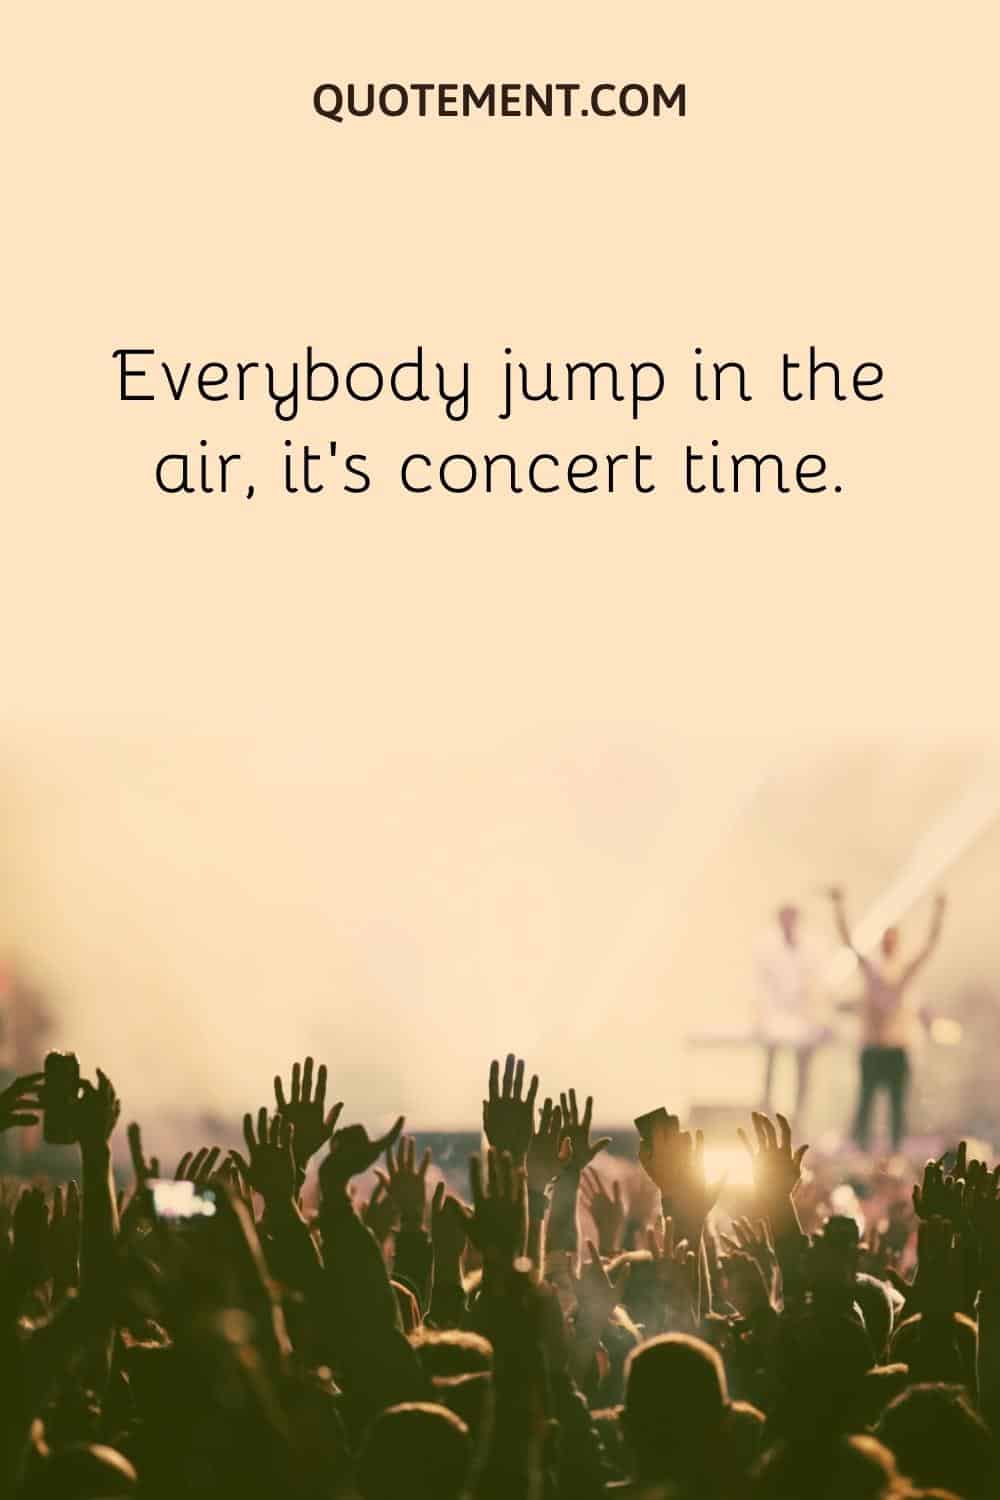 Everybody jump in the air, it’s concert time.